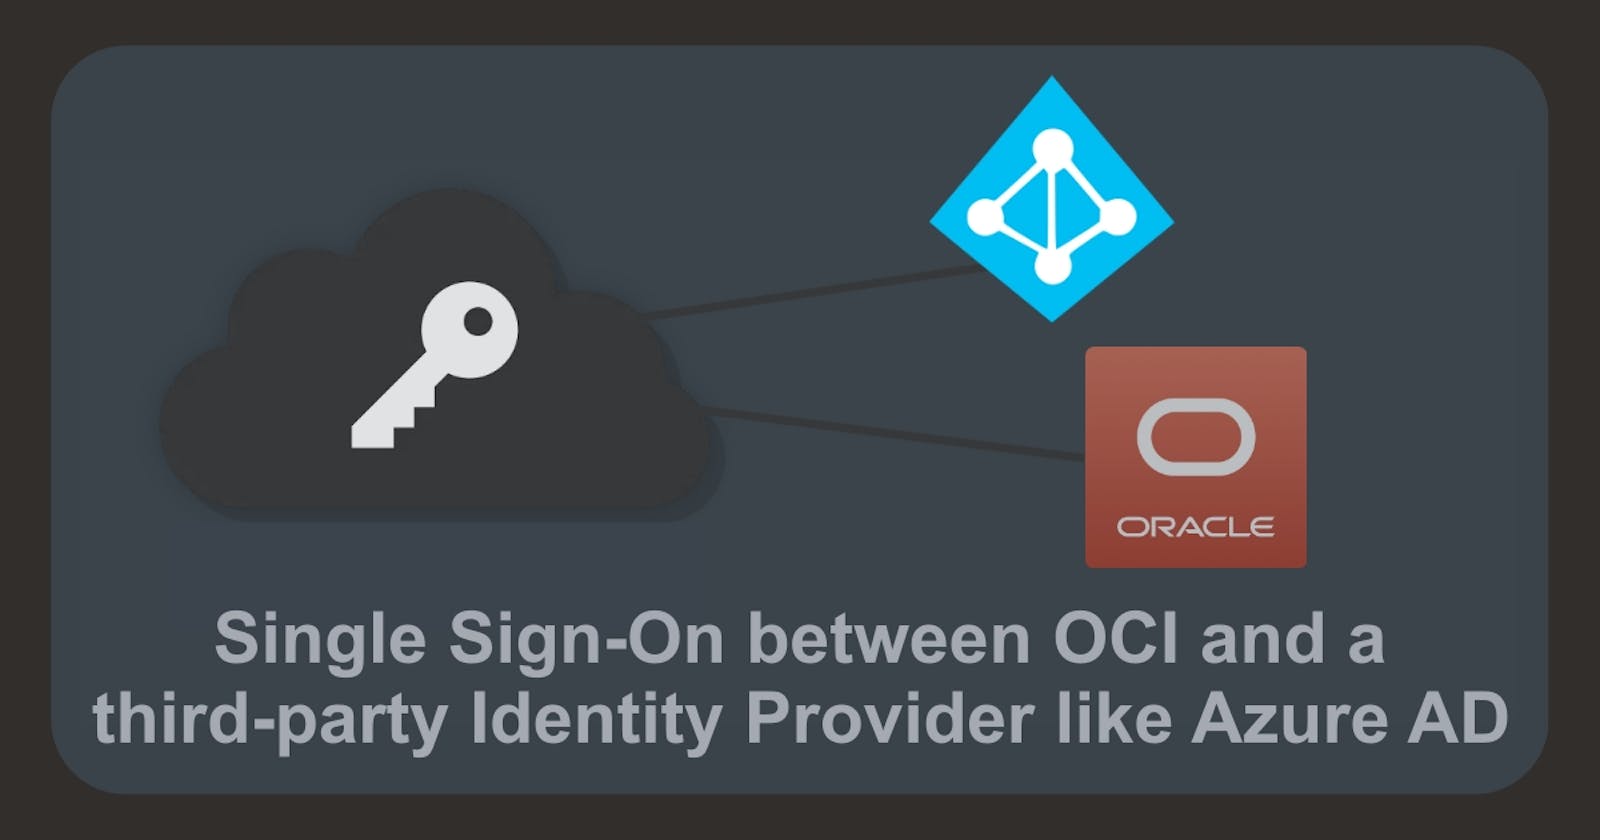 Single Sign-On between OCI and a third-party Identity Provider like Microsoft Azure